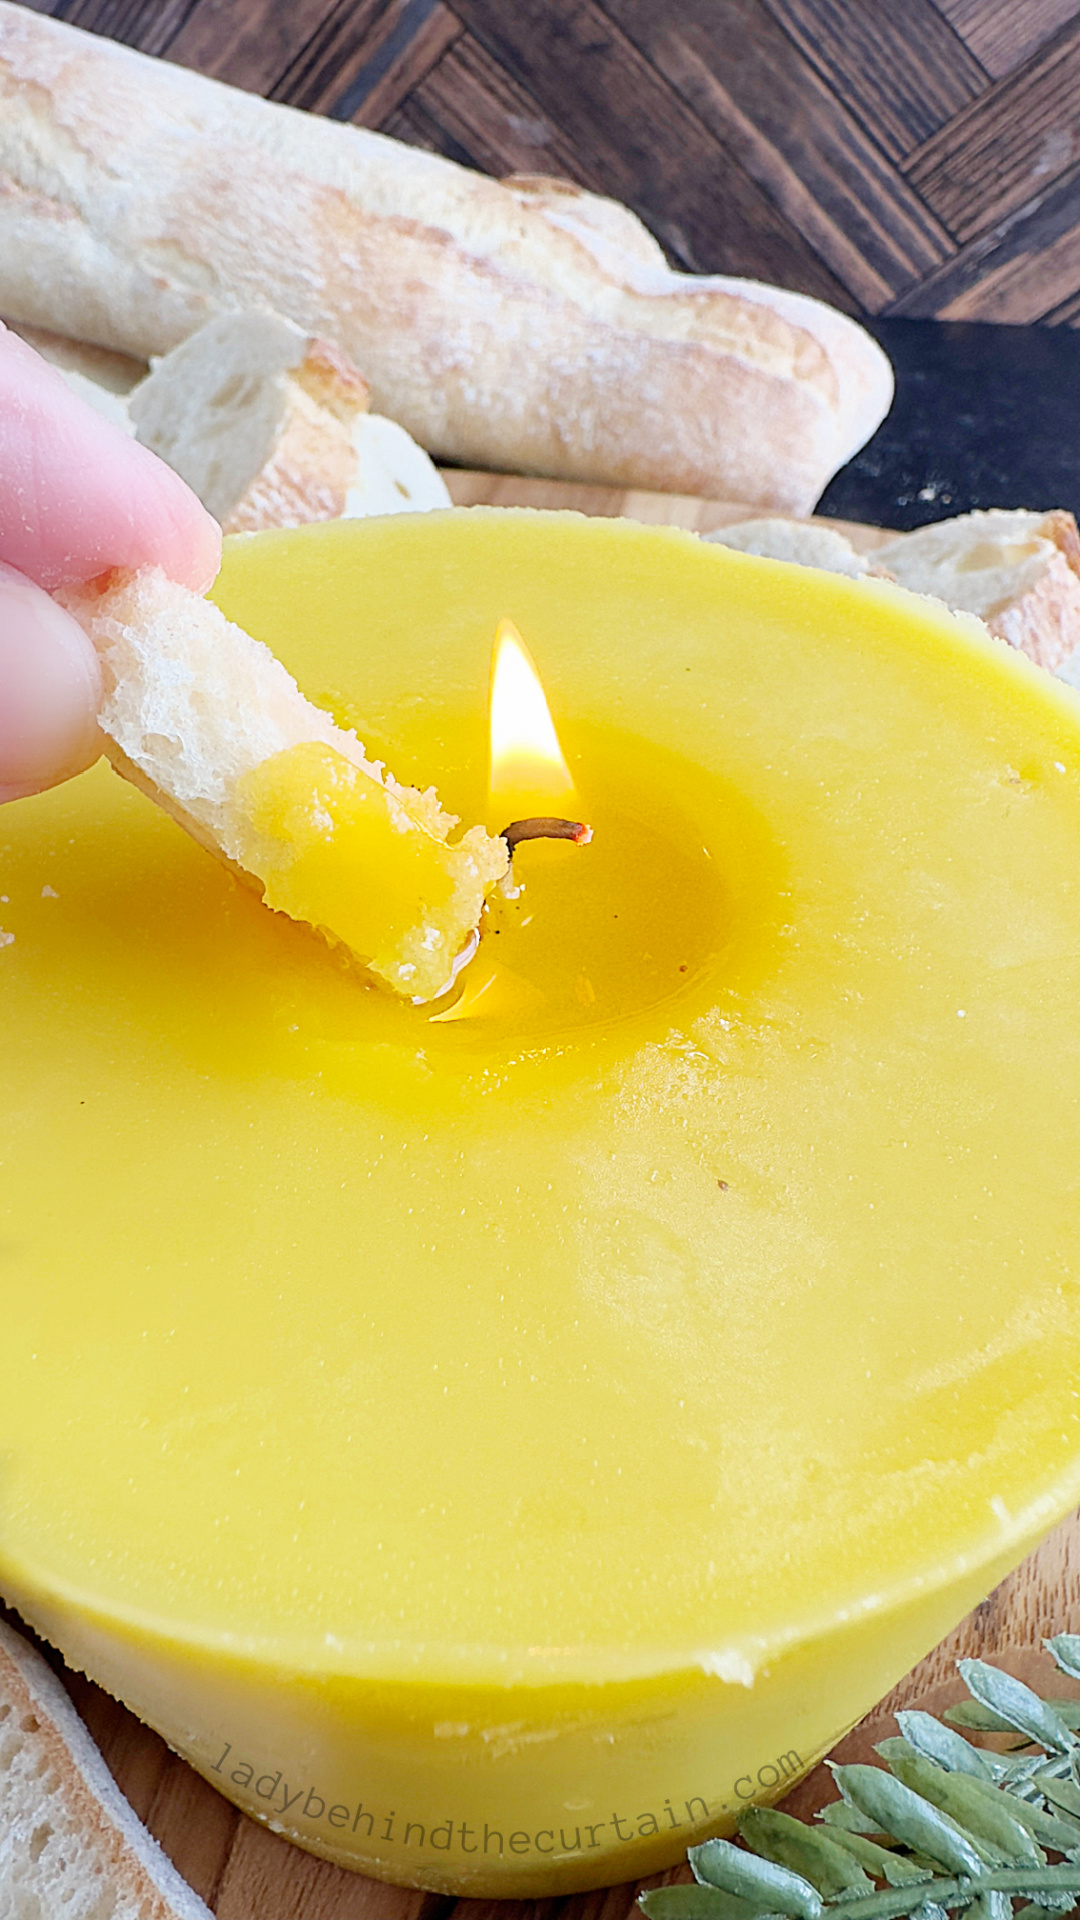 What is a Butter Candle and How Do You Make Them?